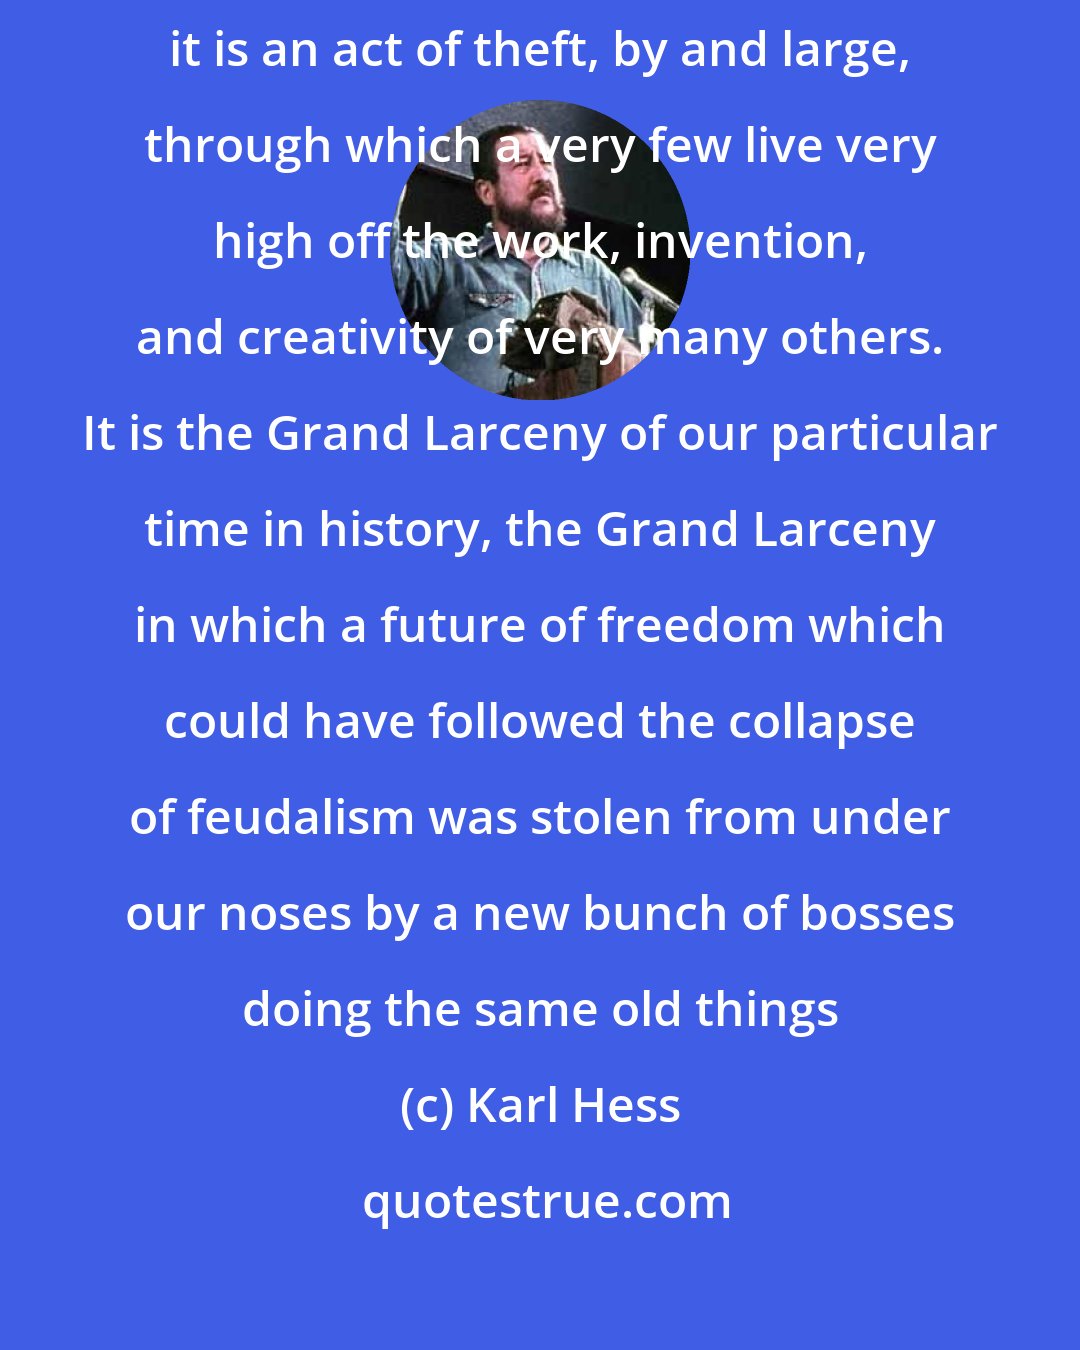 Karl Hess: What I have learned about corporate capitalism, roughly, is that it is an act of theft, by and large, through which a very few live very high off the work, invention, and creativity of very many others. It is the Grand Larceny of our particular time in history, the Grand Larceny in which a future of freedom which could have followed the collapse of feudalism was stolen from under our noses by a new bunch of bosses doing the same old things